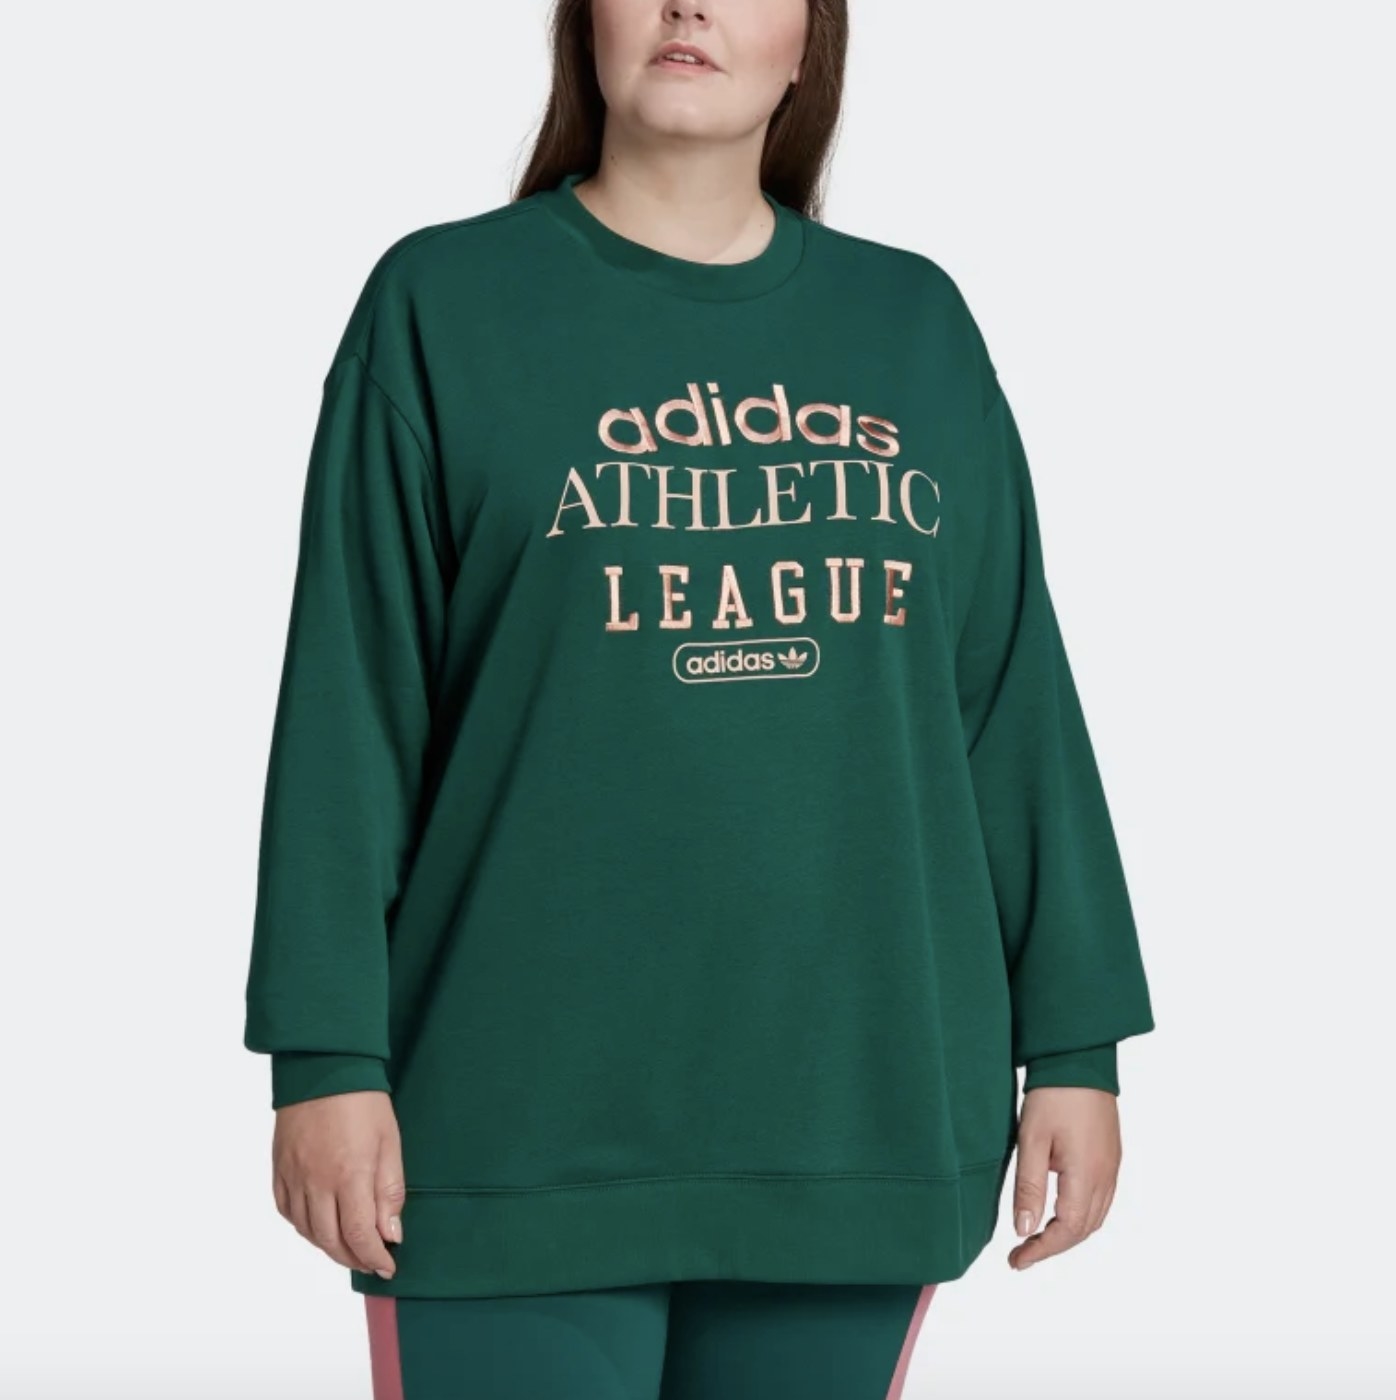 An adult wears the green crewneck with light stitching